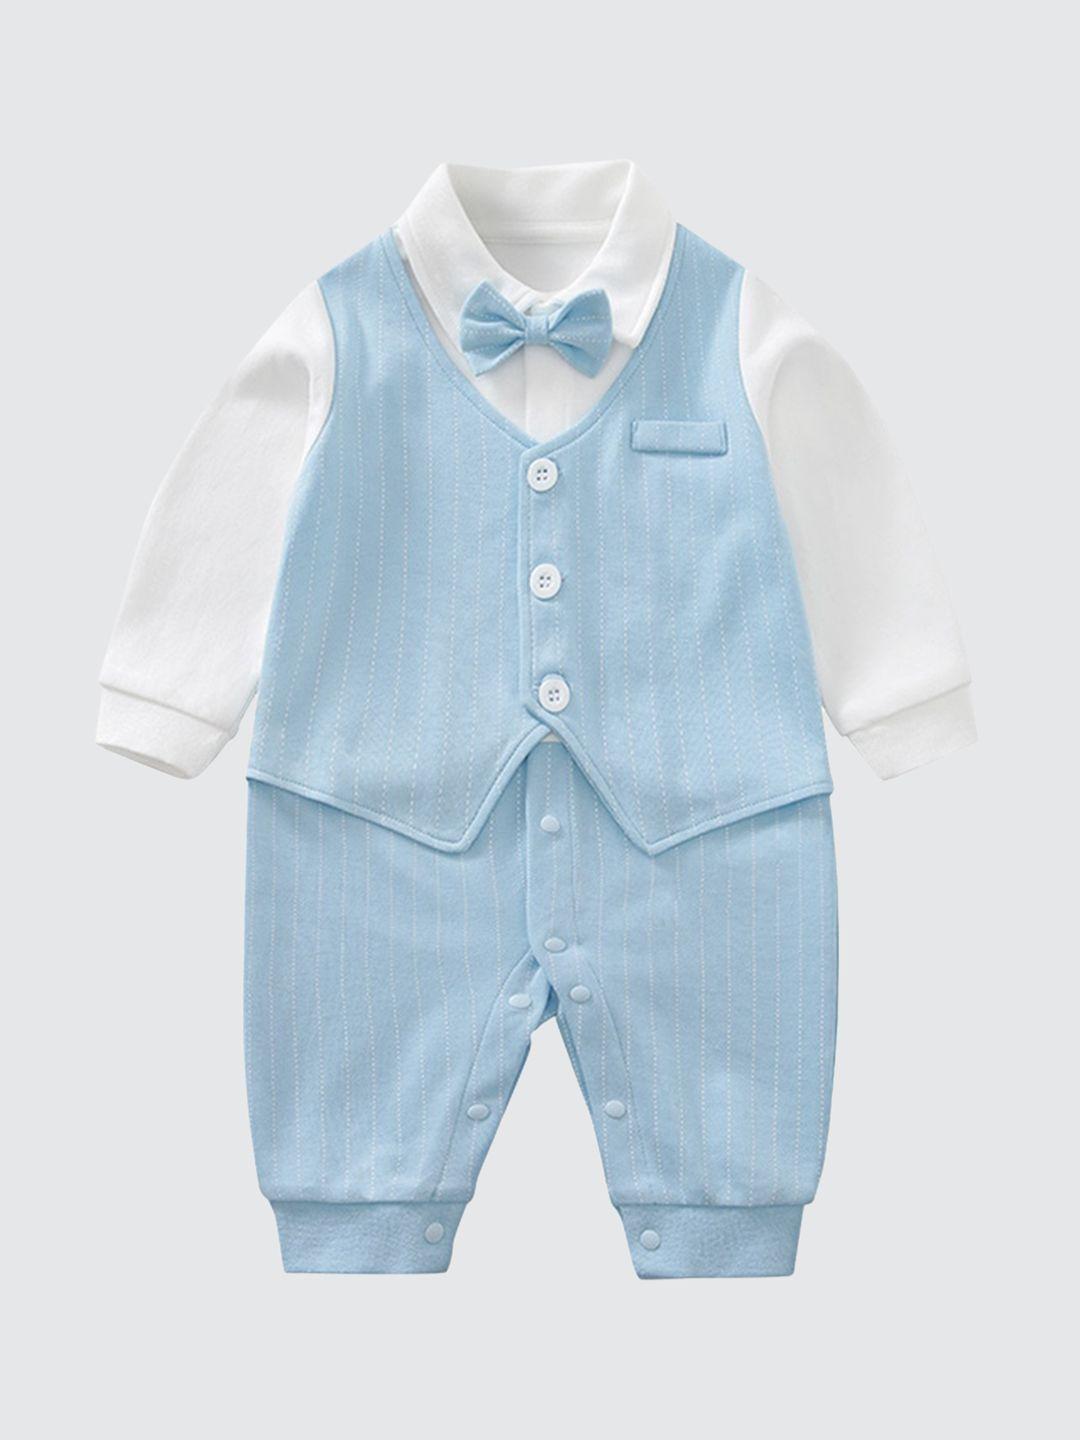 stylecast infant boys blue & white shirt collar cotton rompers